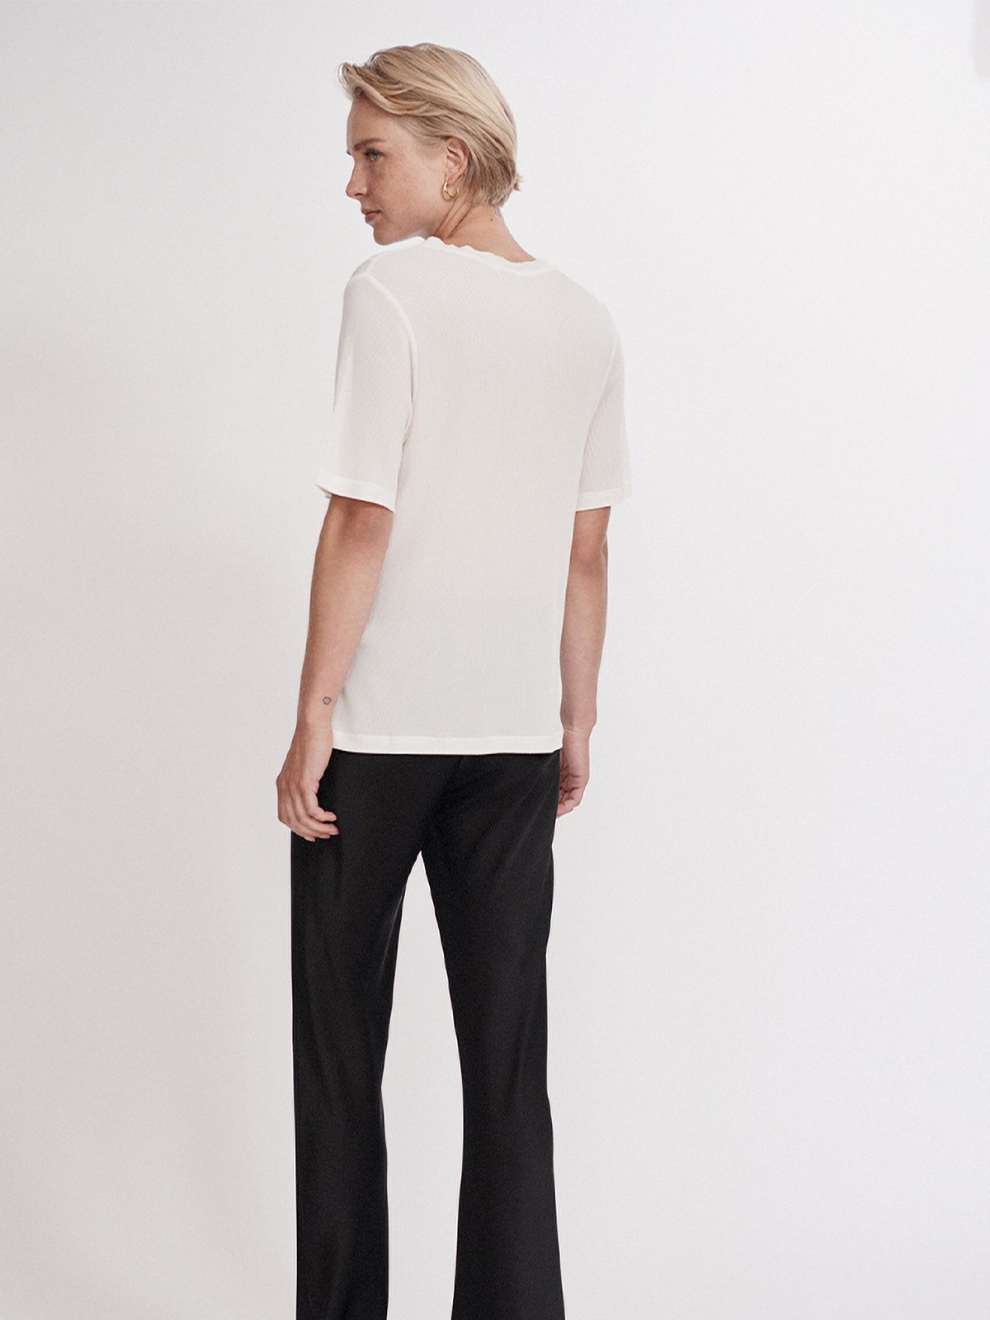 Back view of Silk White Ribbed T-shirt by Silk Laundry worn with Black bias cut Pants